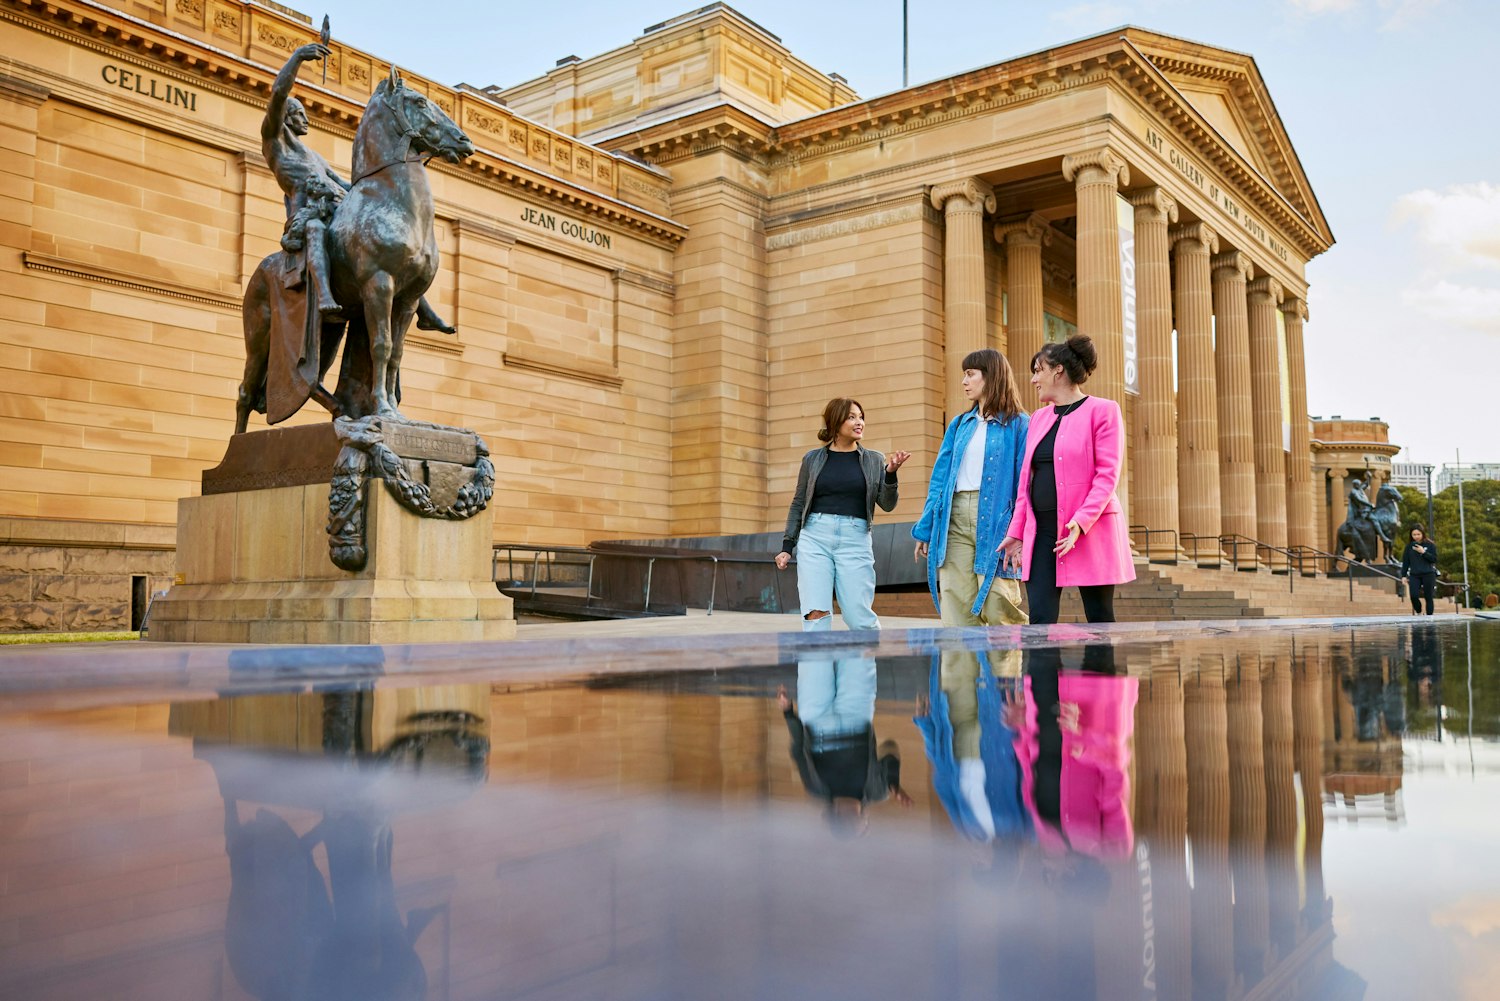 Three people stand at the front of a large sandstone building next to a sculpture of a person on a horse